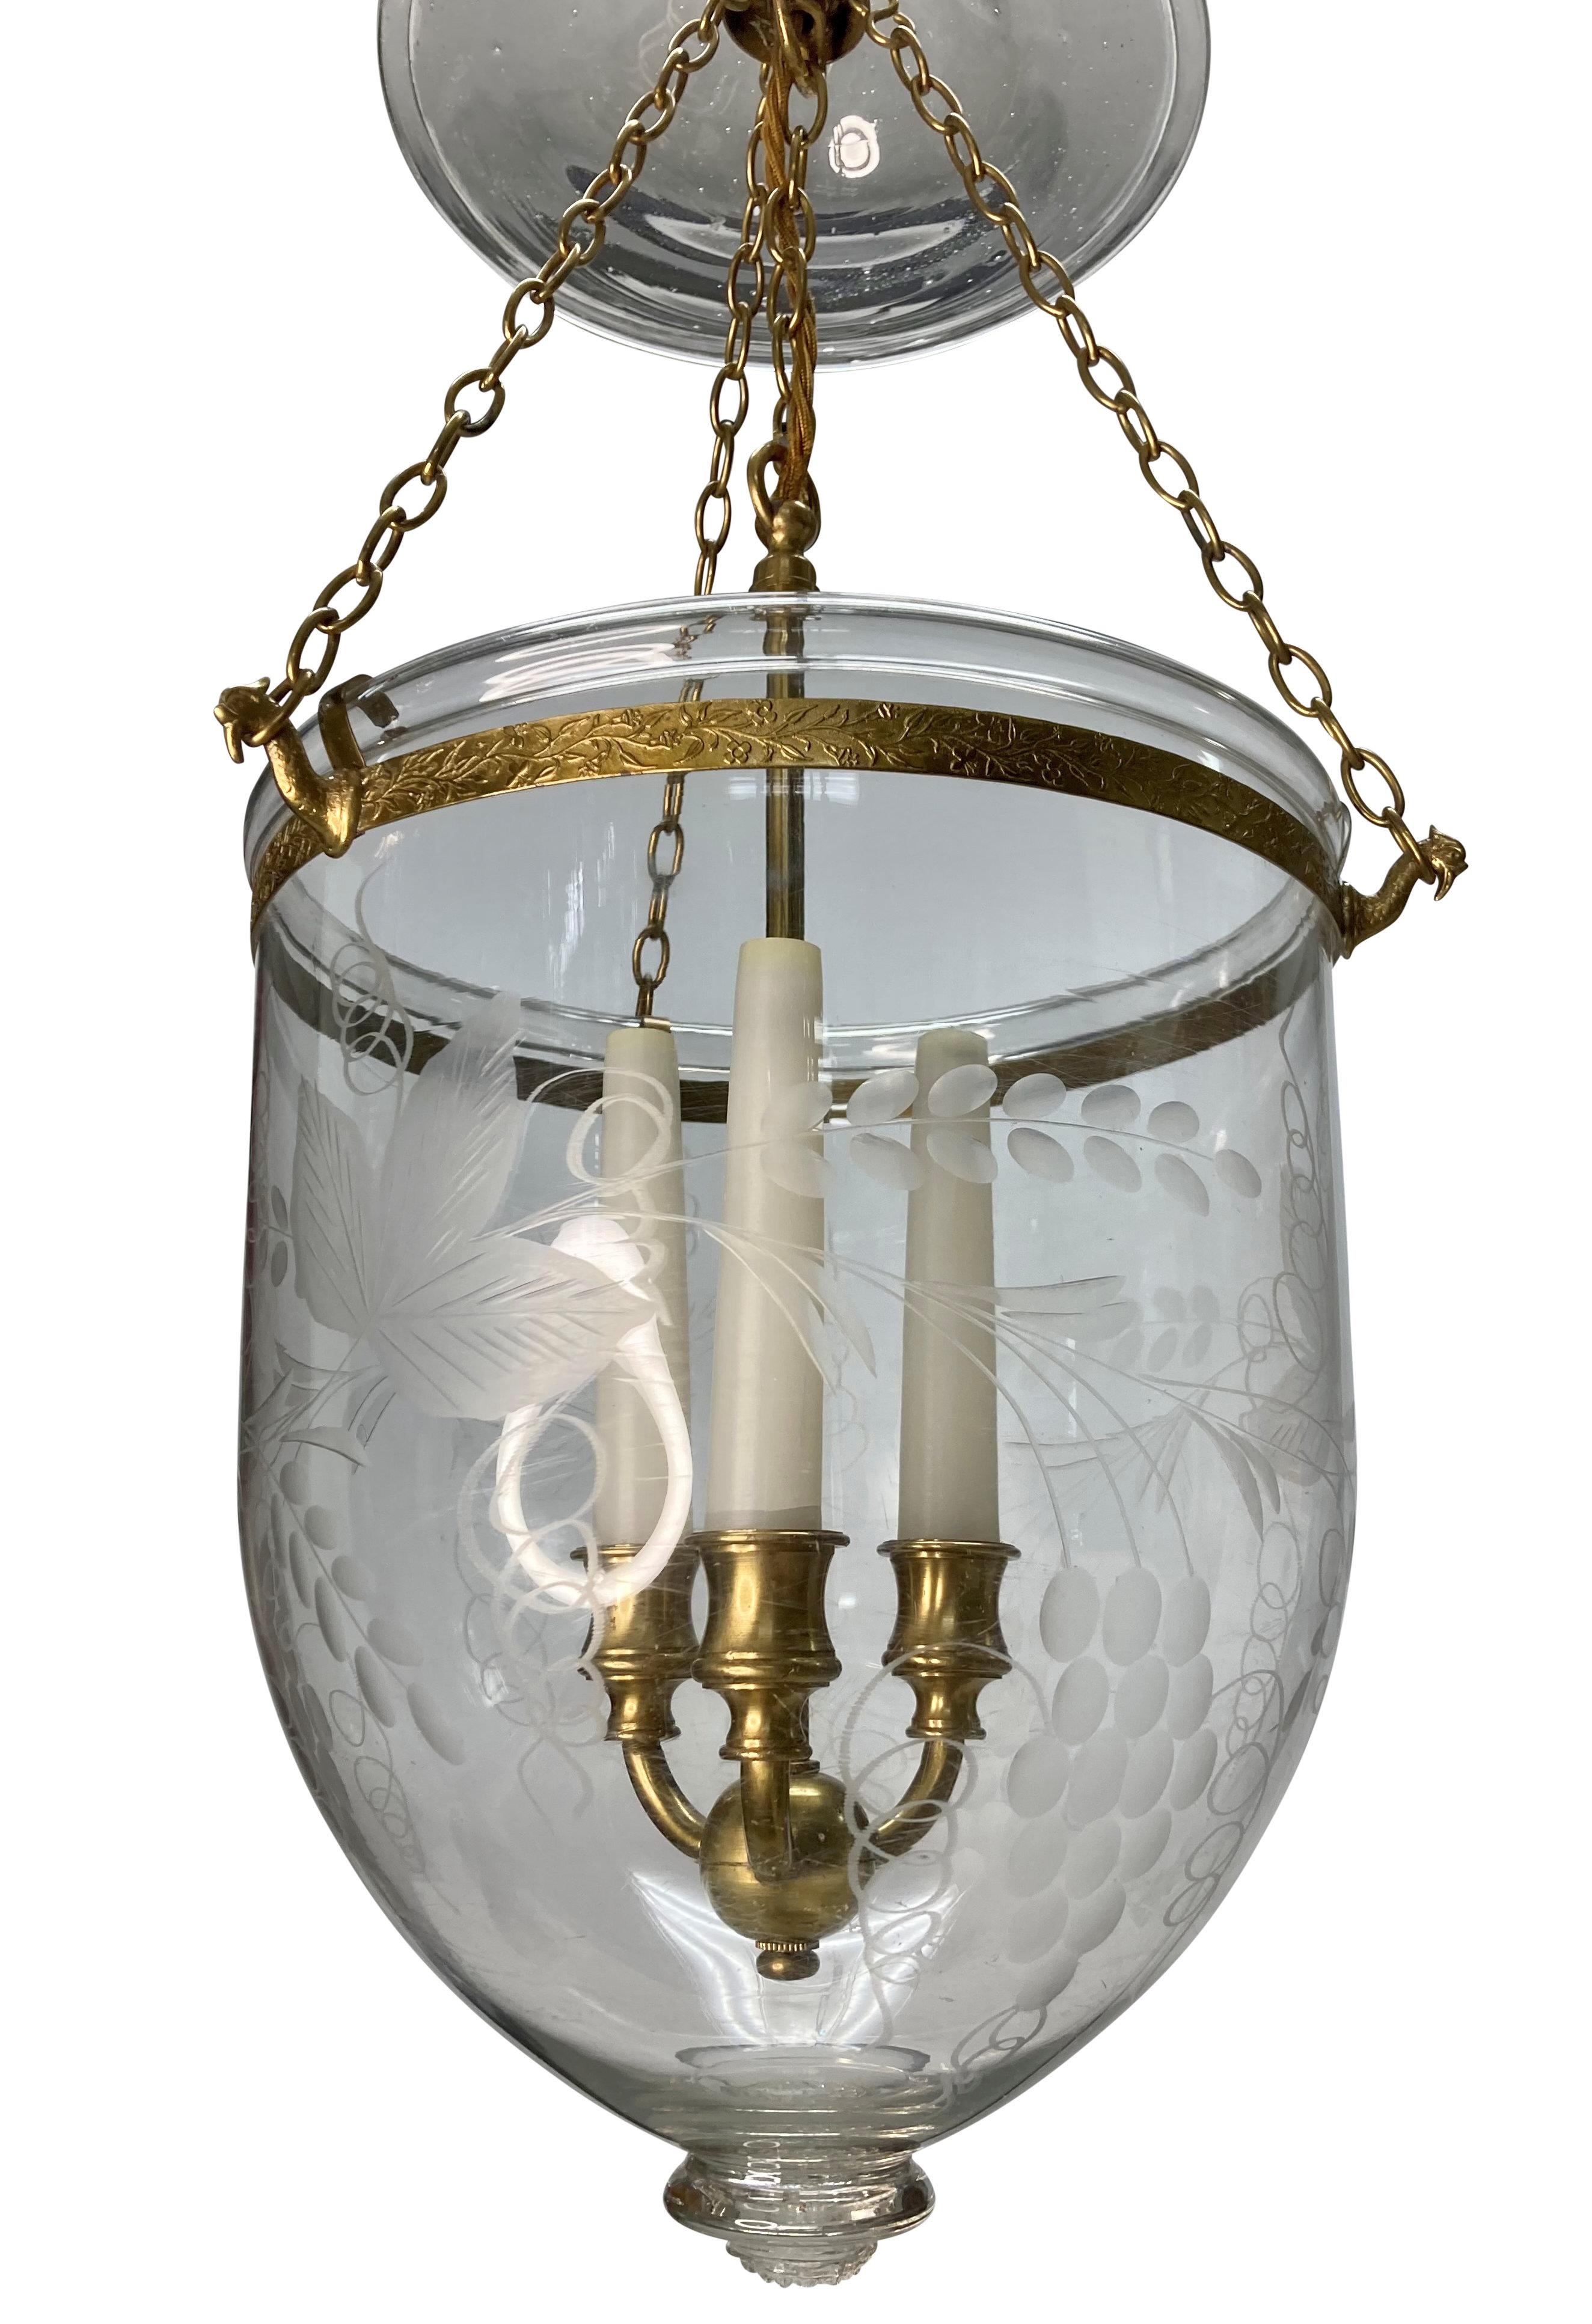 English Bell Lantern With Brass Fittings & Grape Vine Design For Sale 2